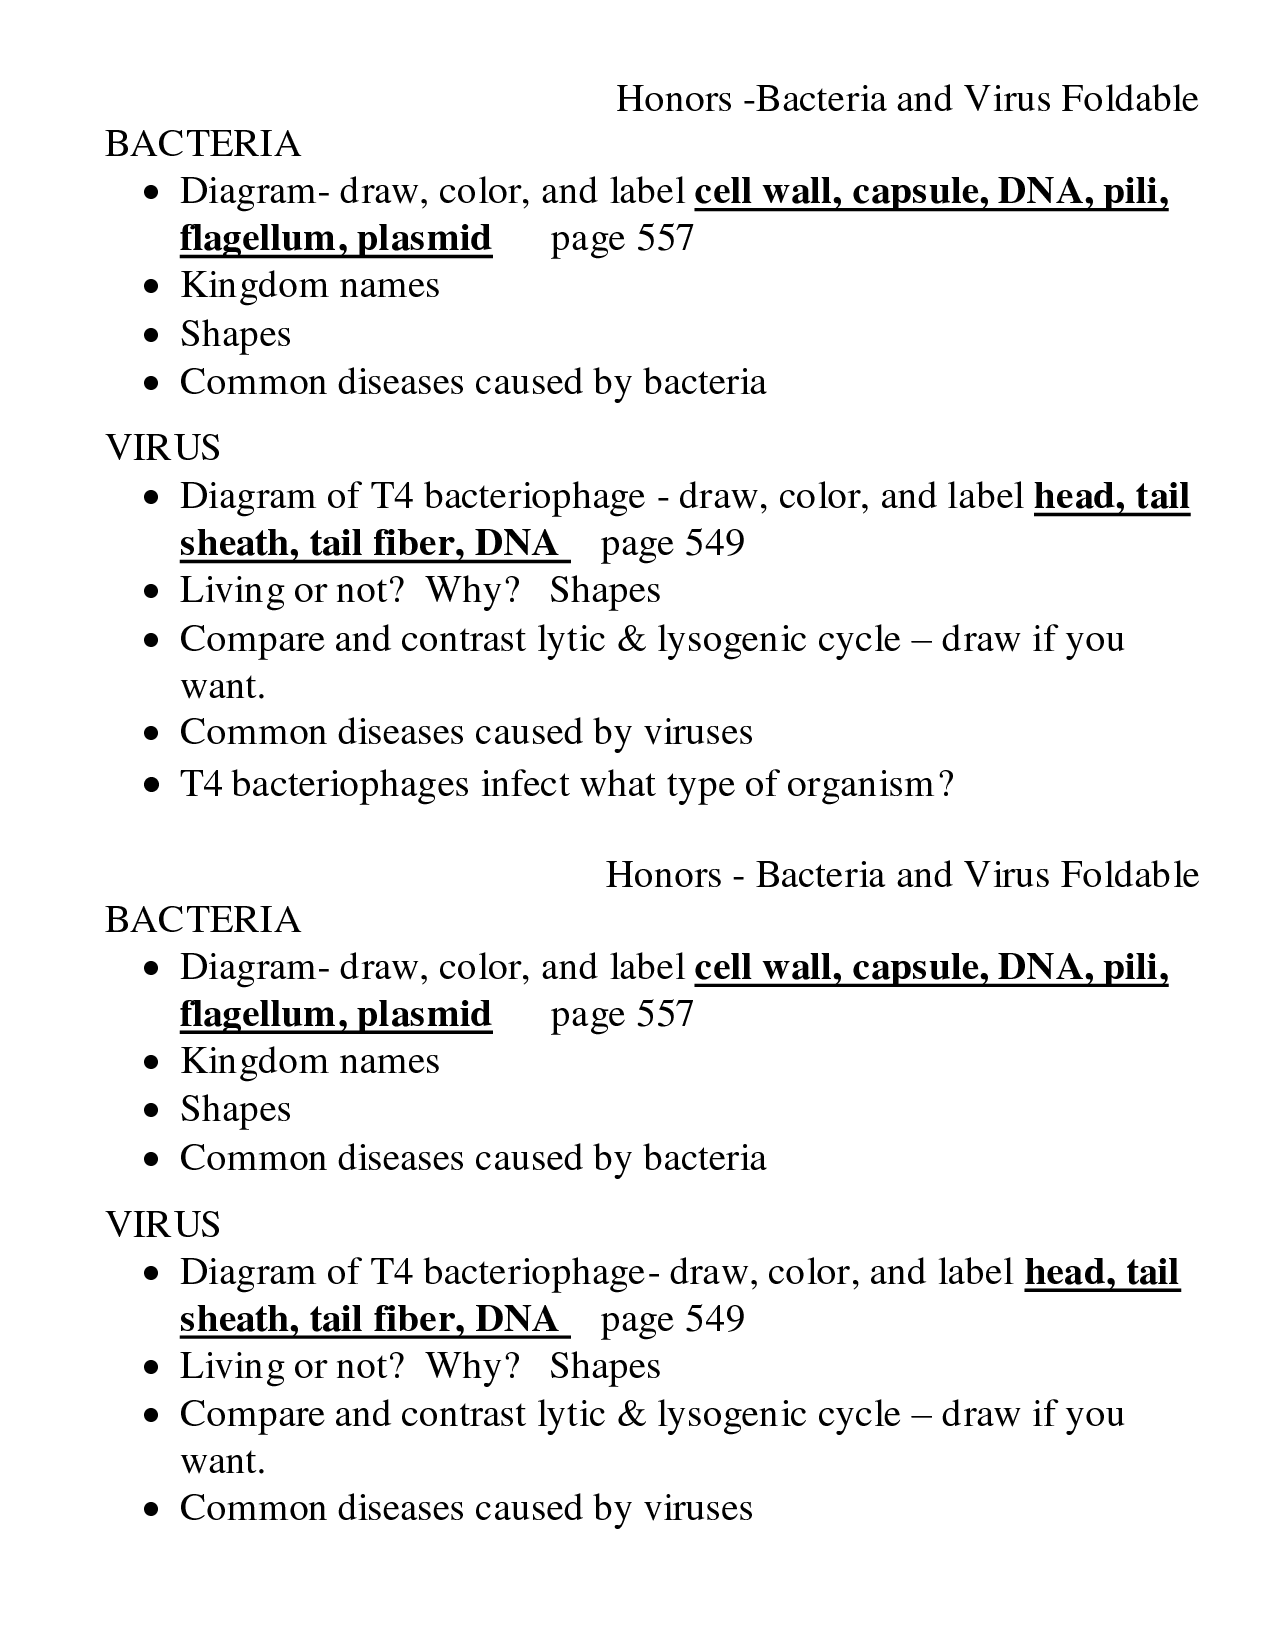 14-best-images-of-viruses-and-bacteria-worksheets-bacteria-and-viruses-worksheet-answers